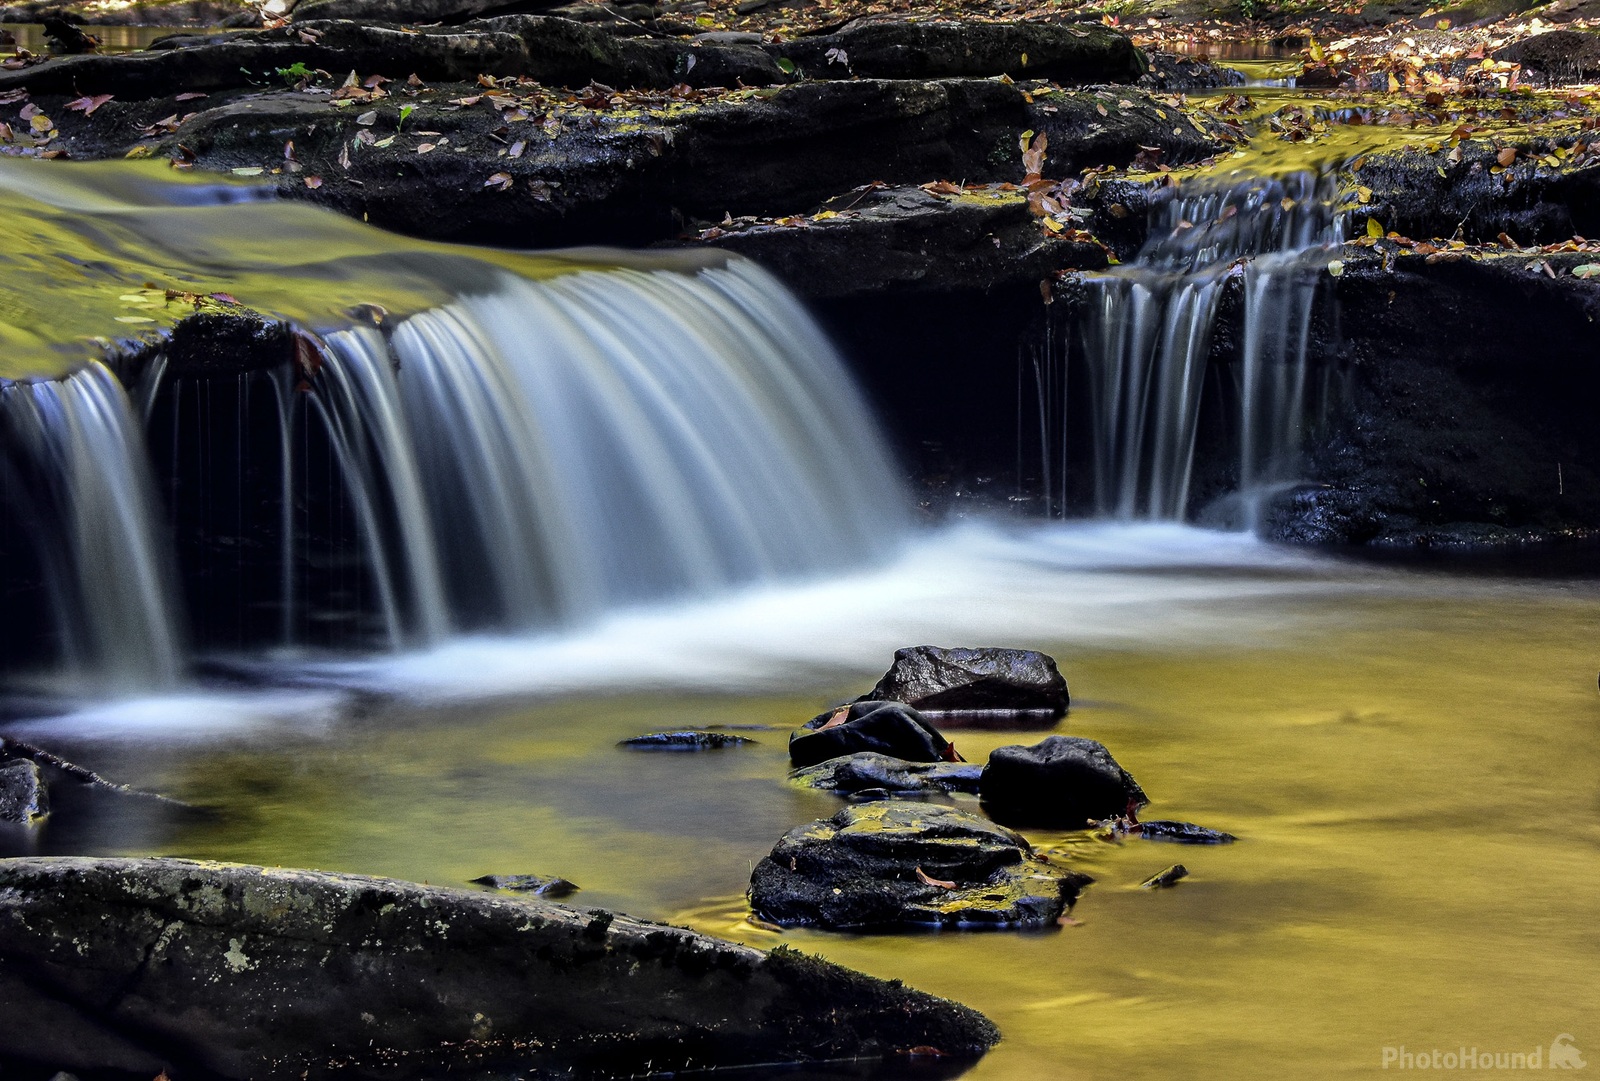 Image of Ricketts Glen State Park by Charley Corace